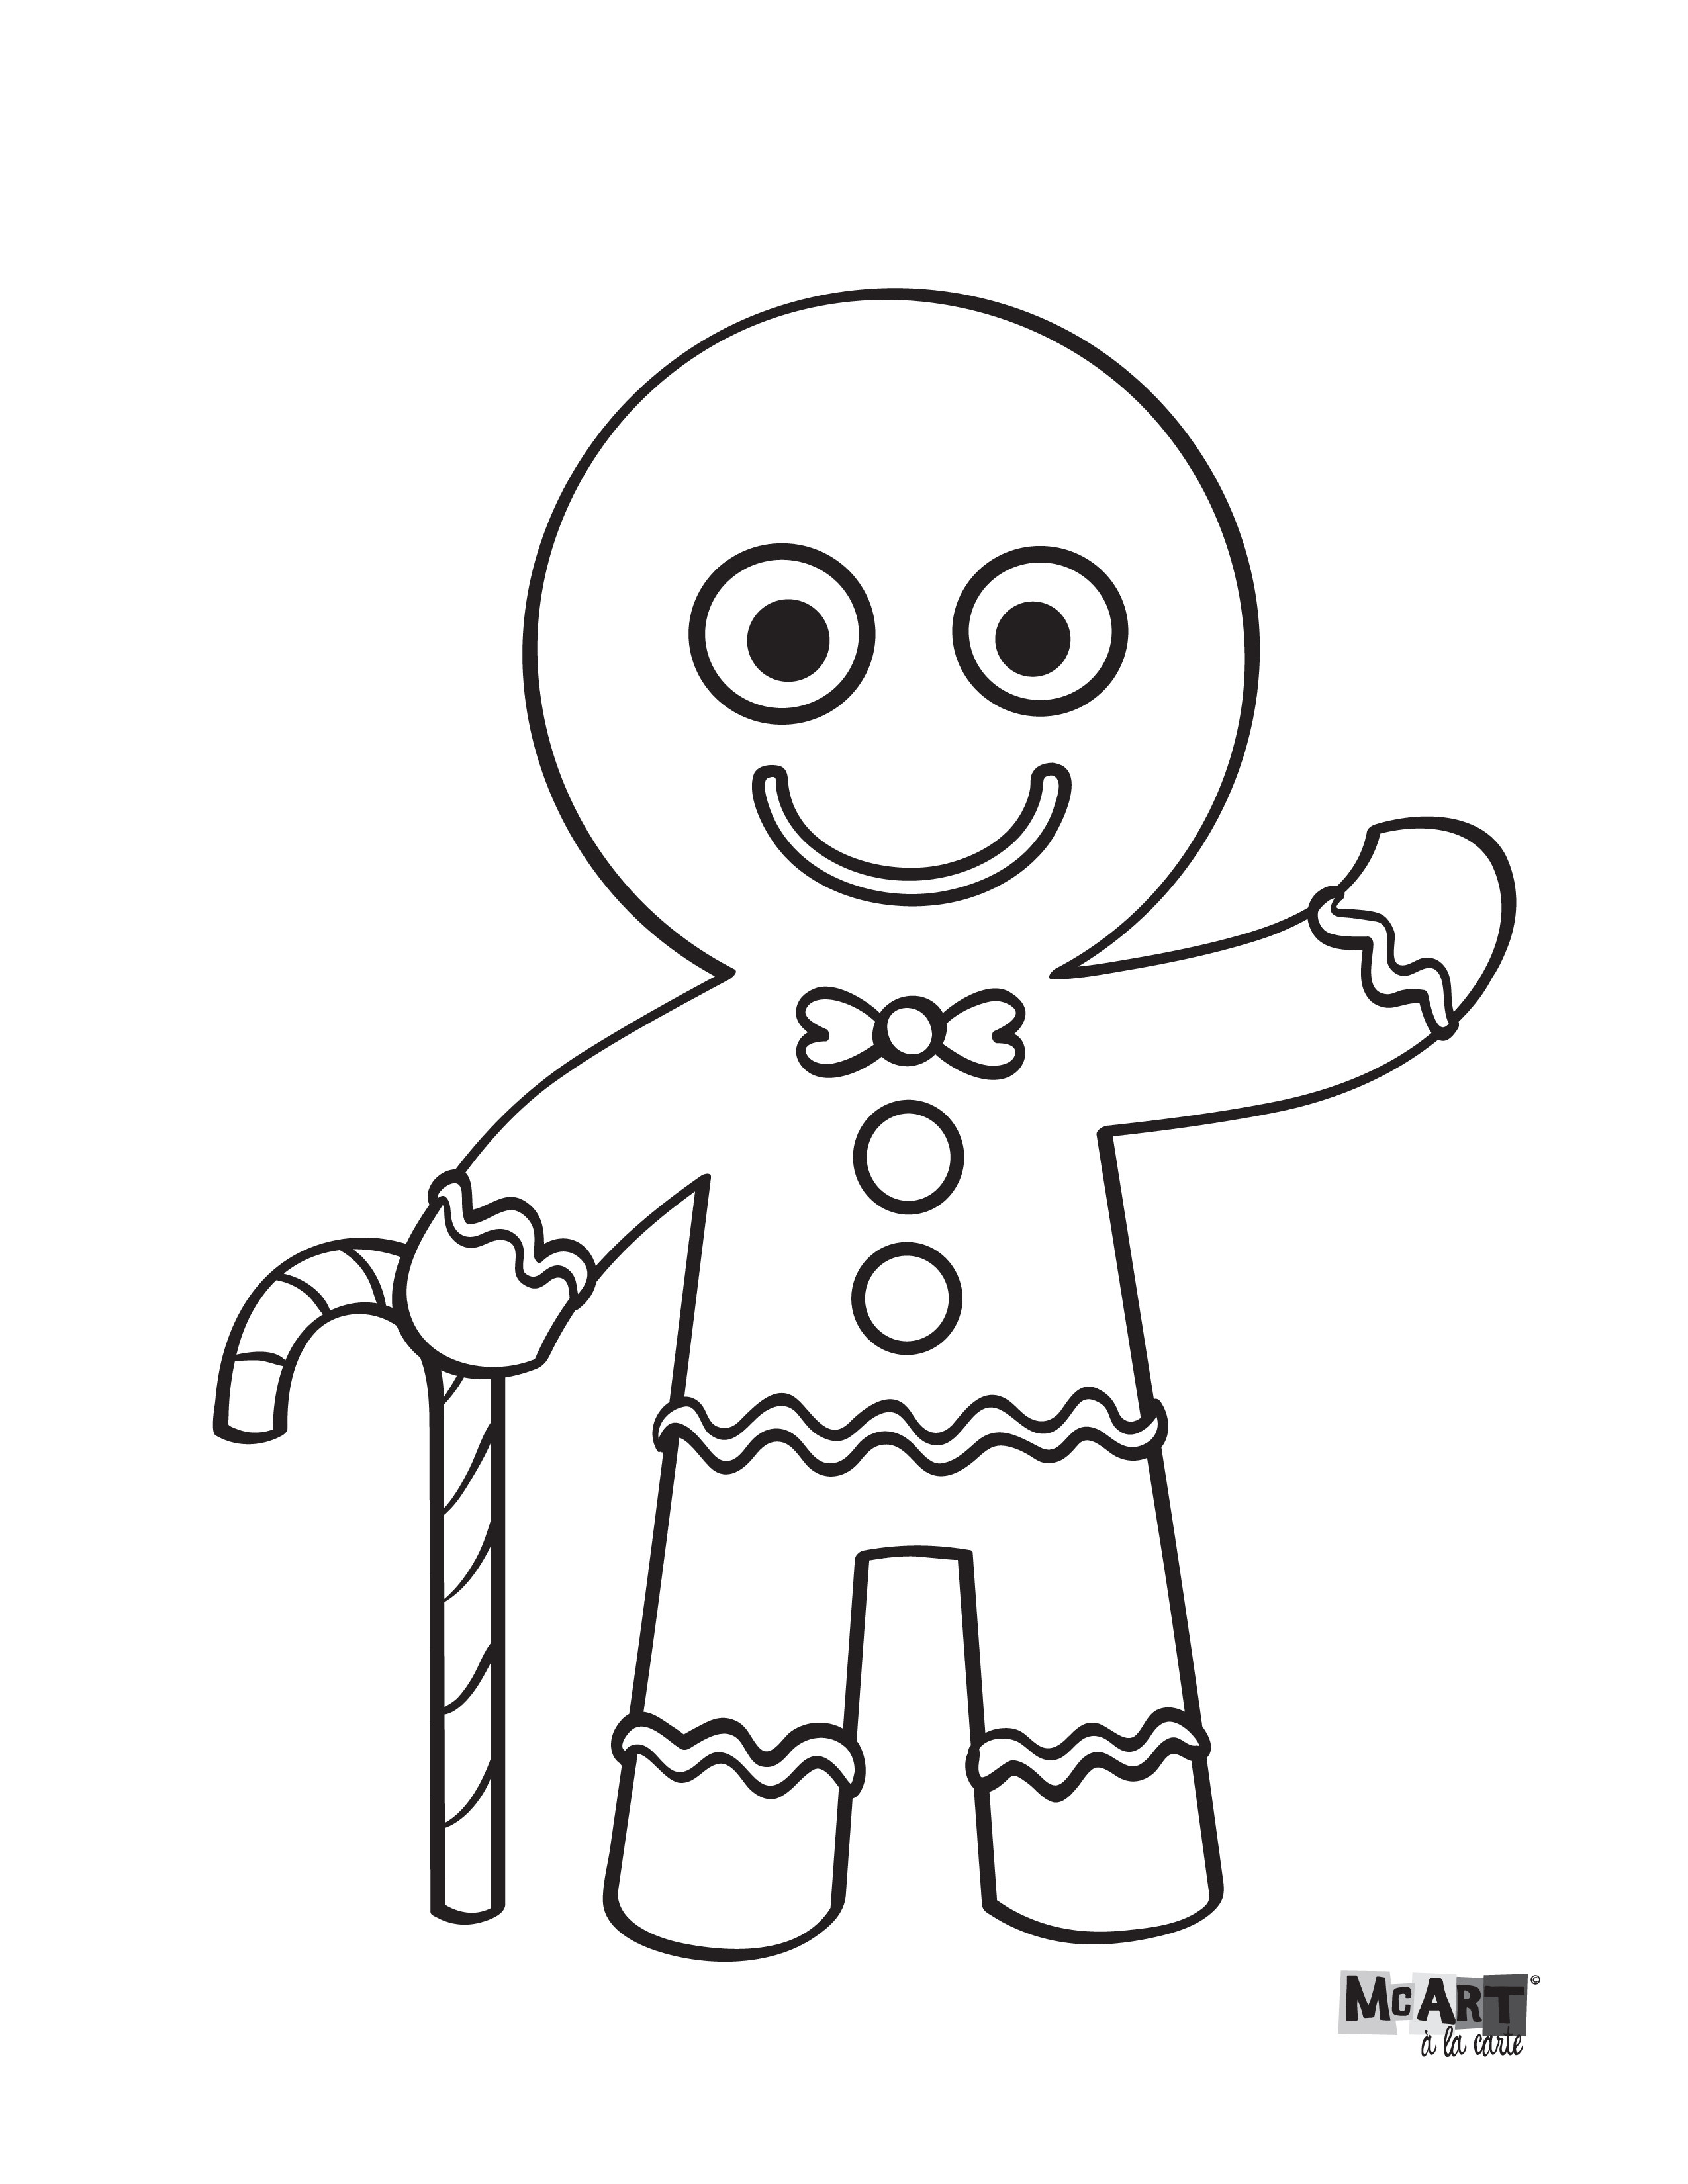 Candy House Coloring Pages For Boys
 Free Lego Man Black And White Download Free Clip Art